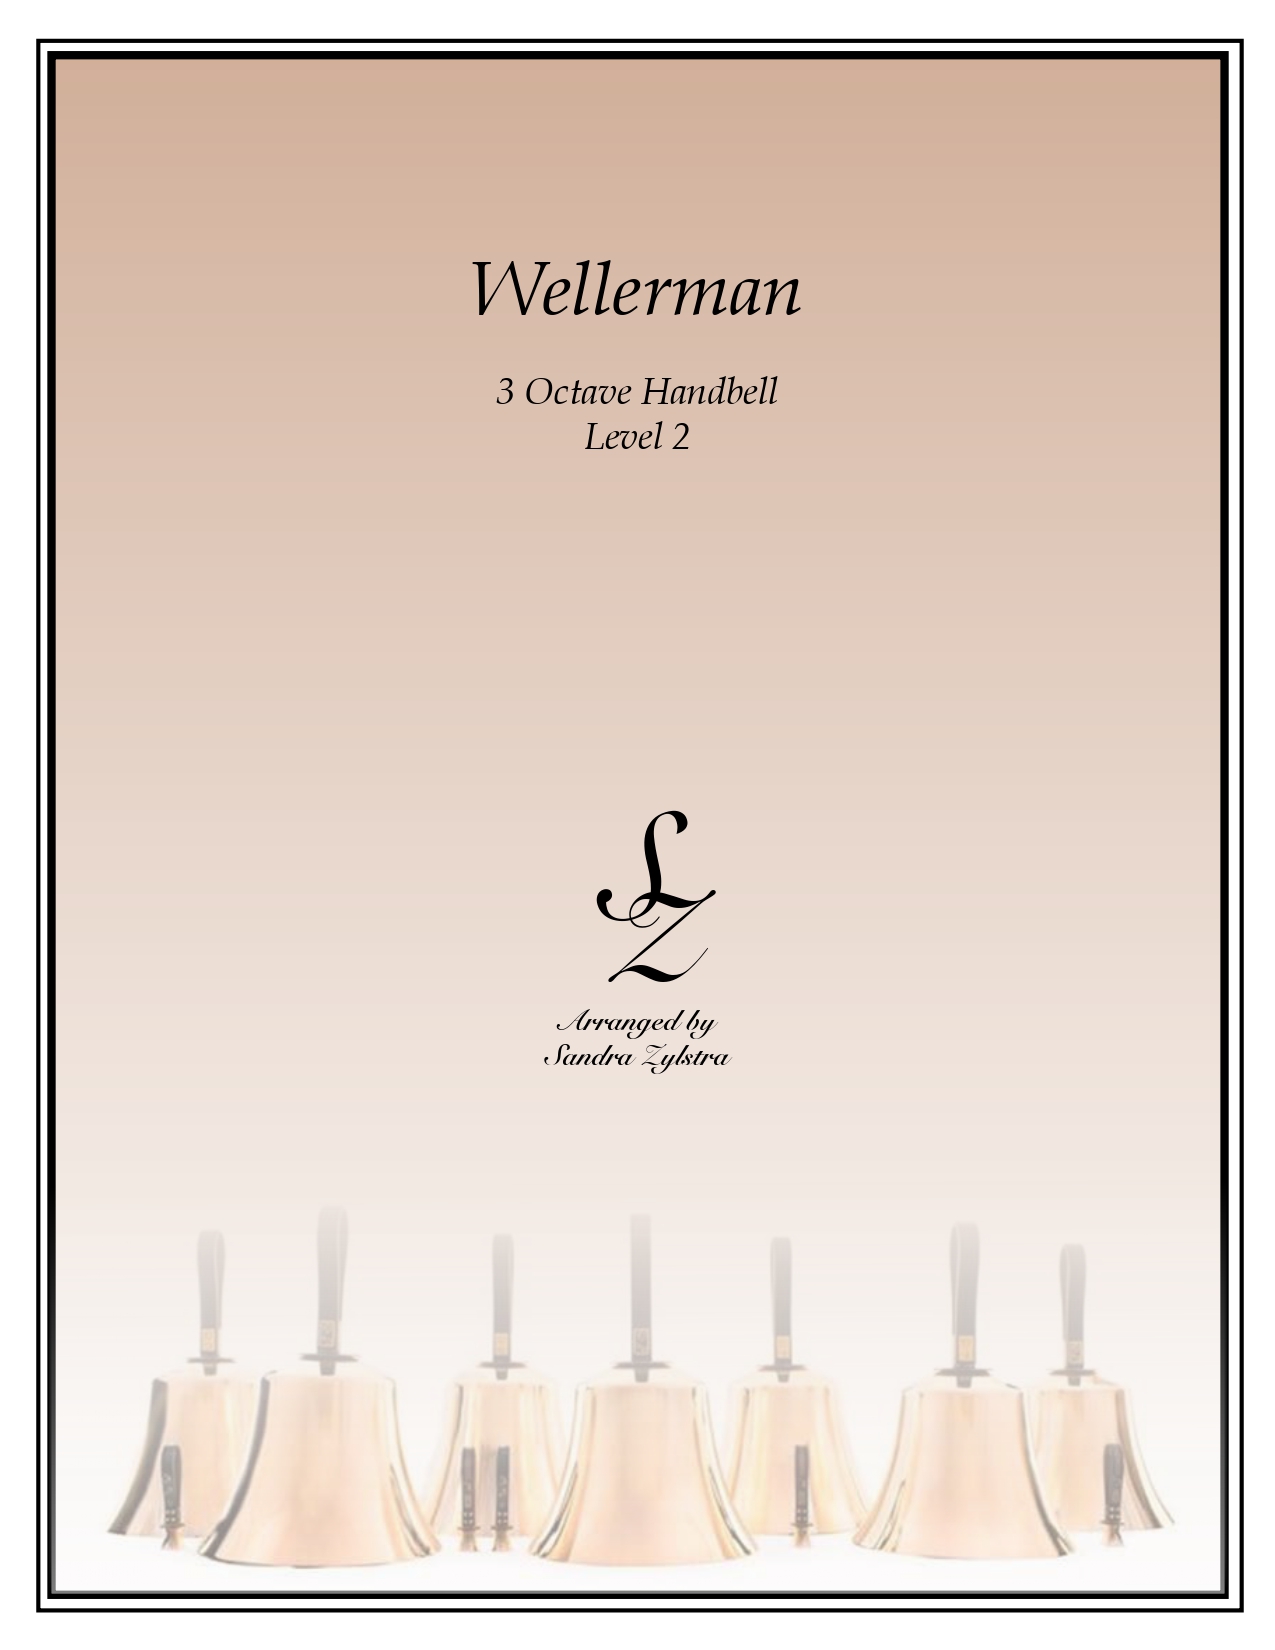 Wellerman 3 octave handbells cover page 00011